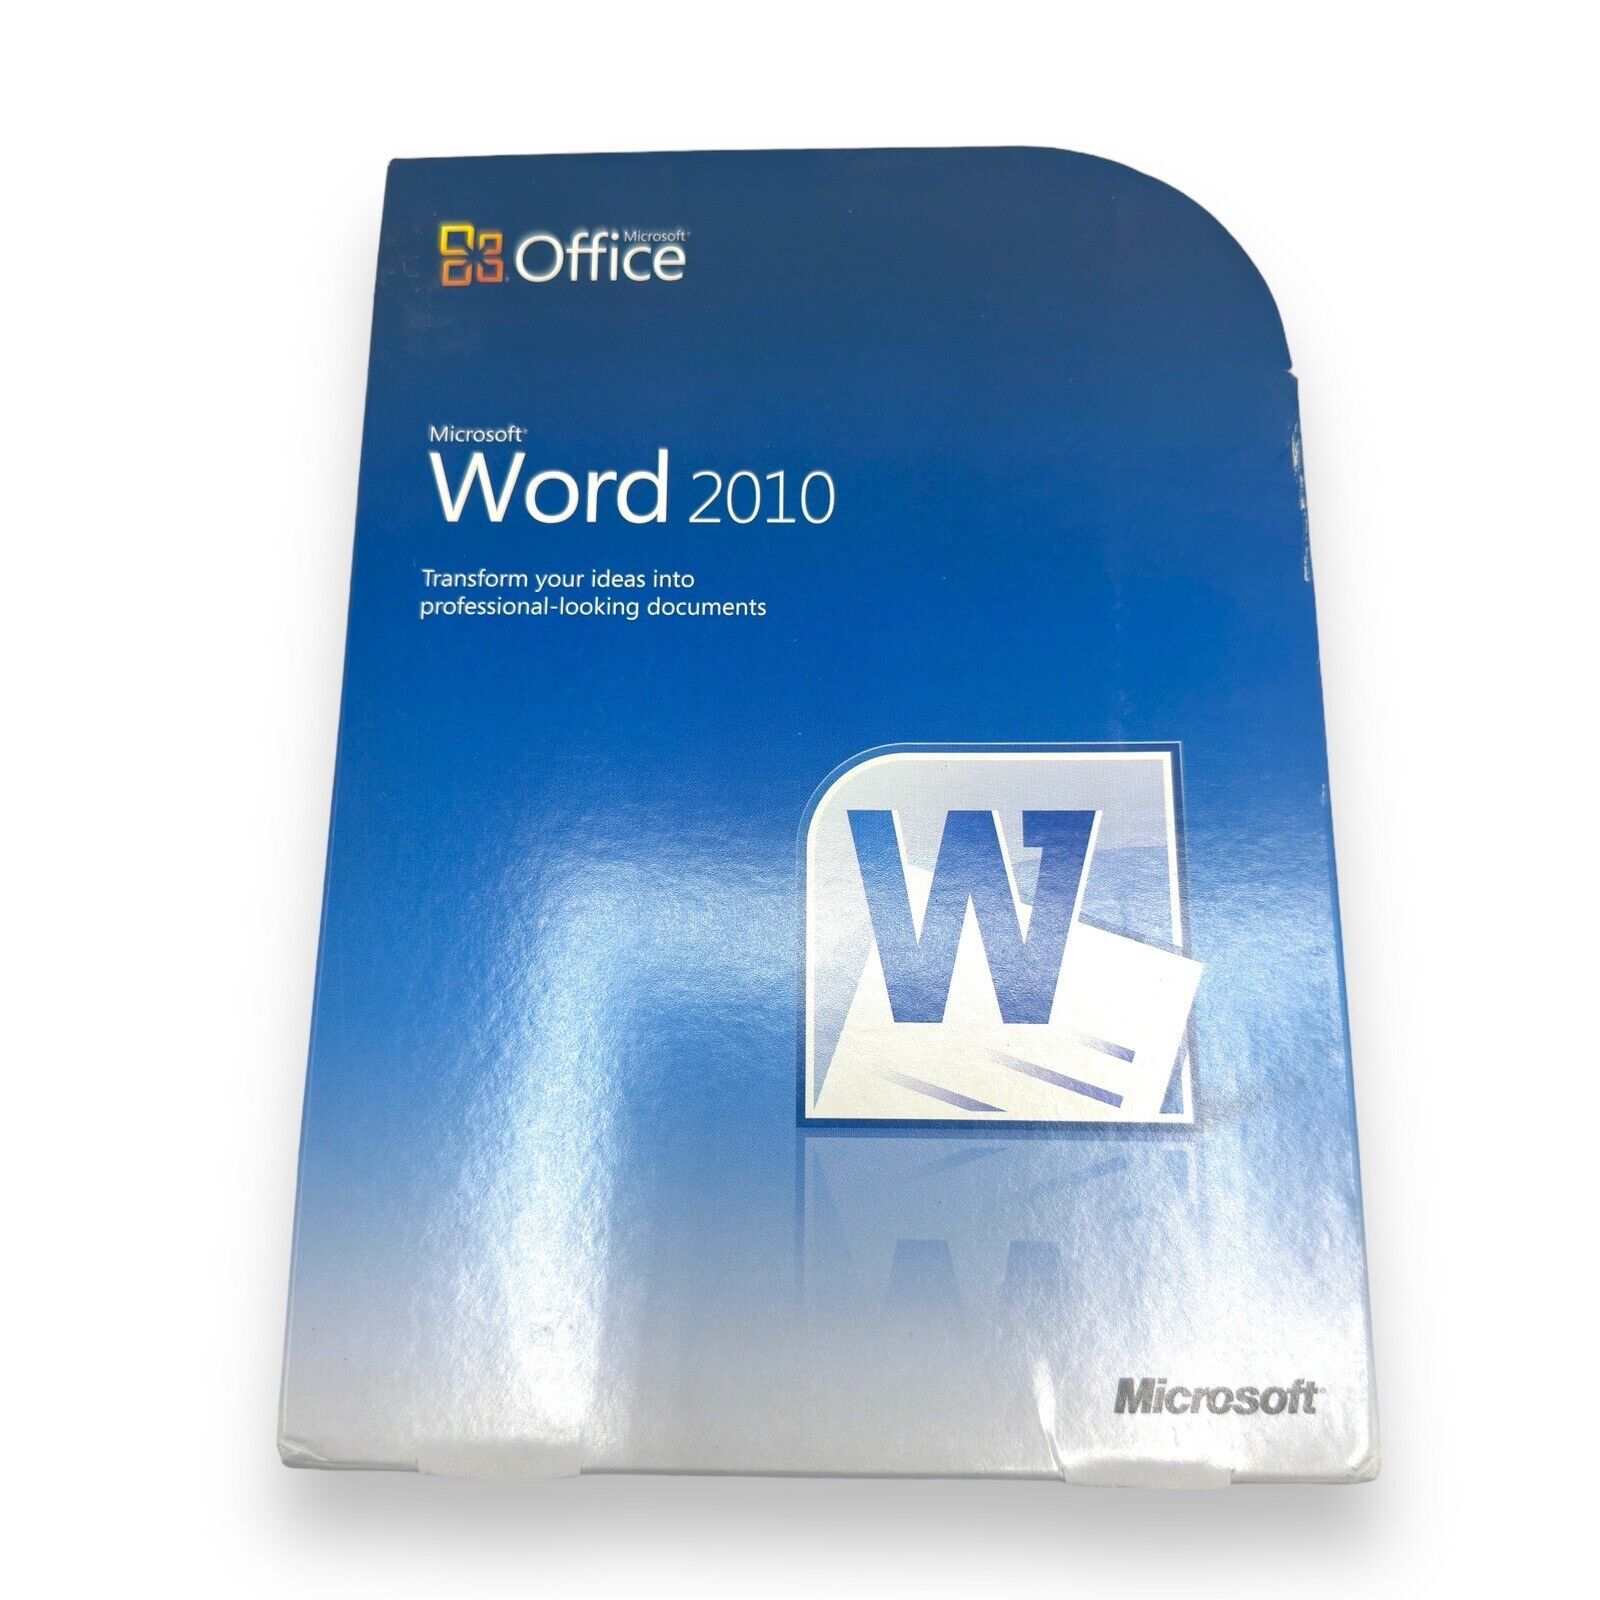 Microsoft MS Office Word 2010 Licensed for PCs Full English Retail Version